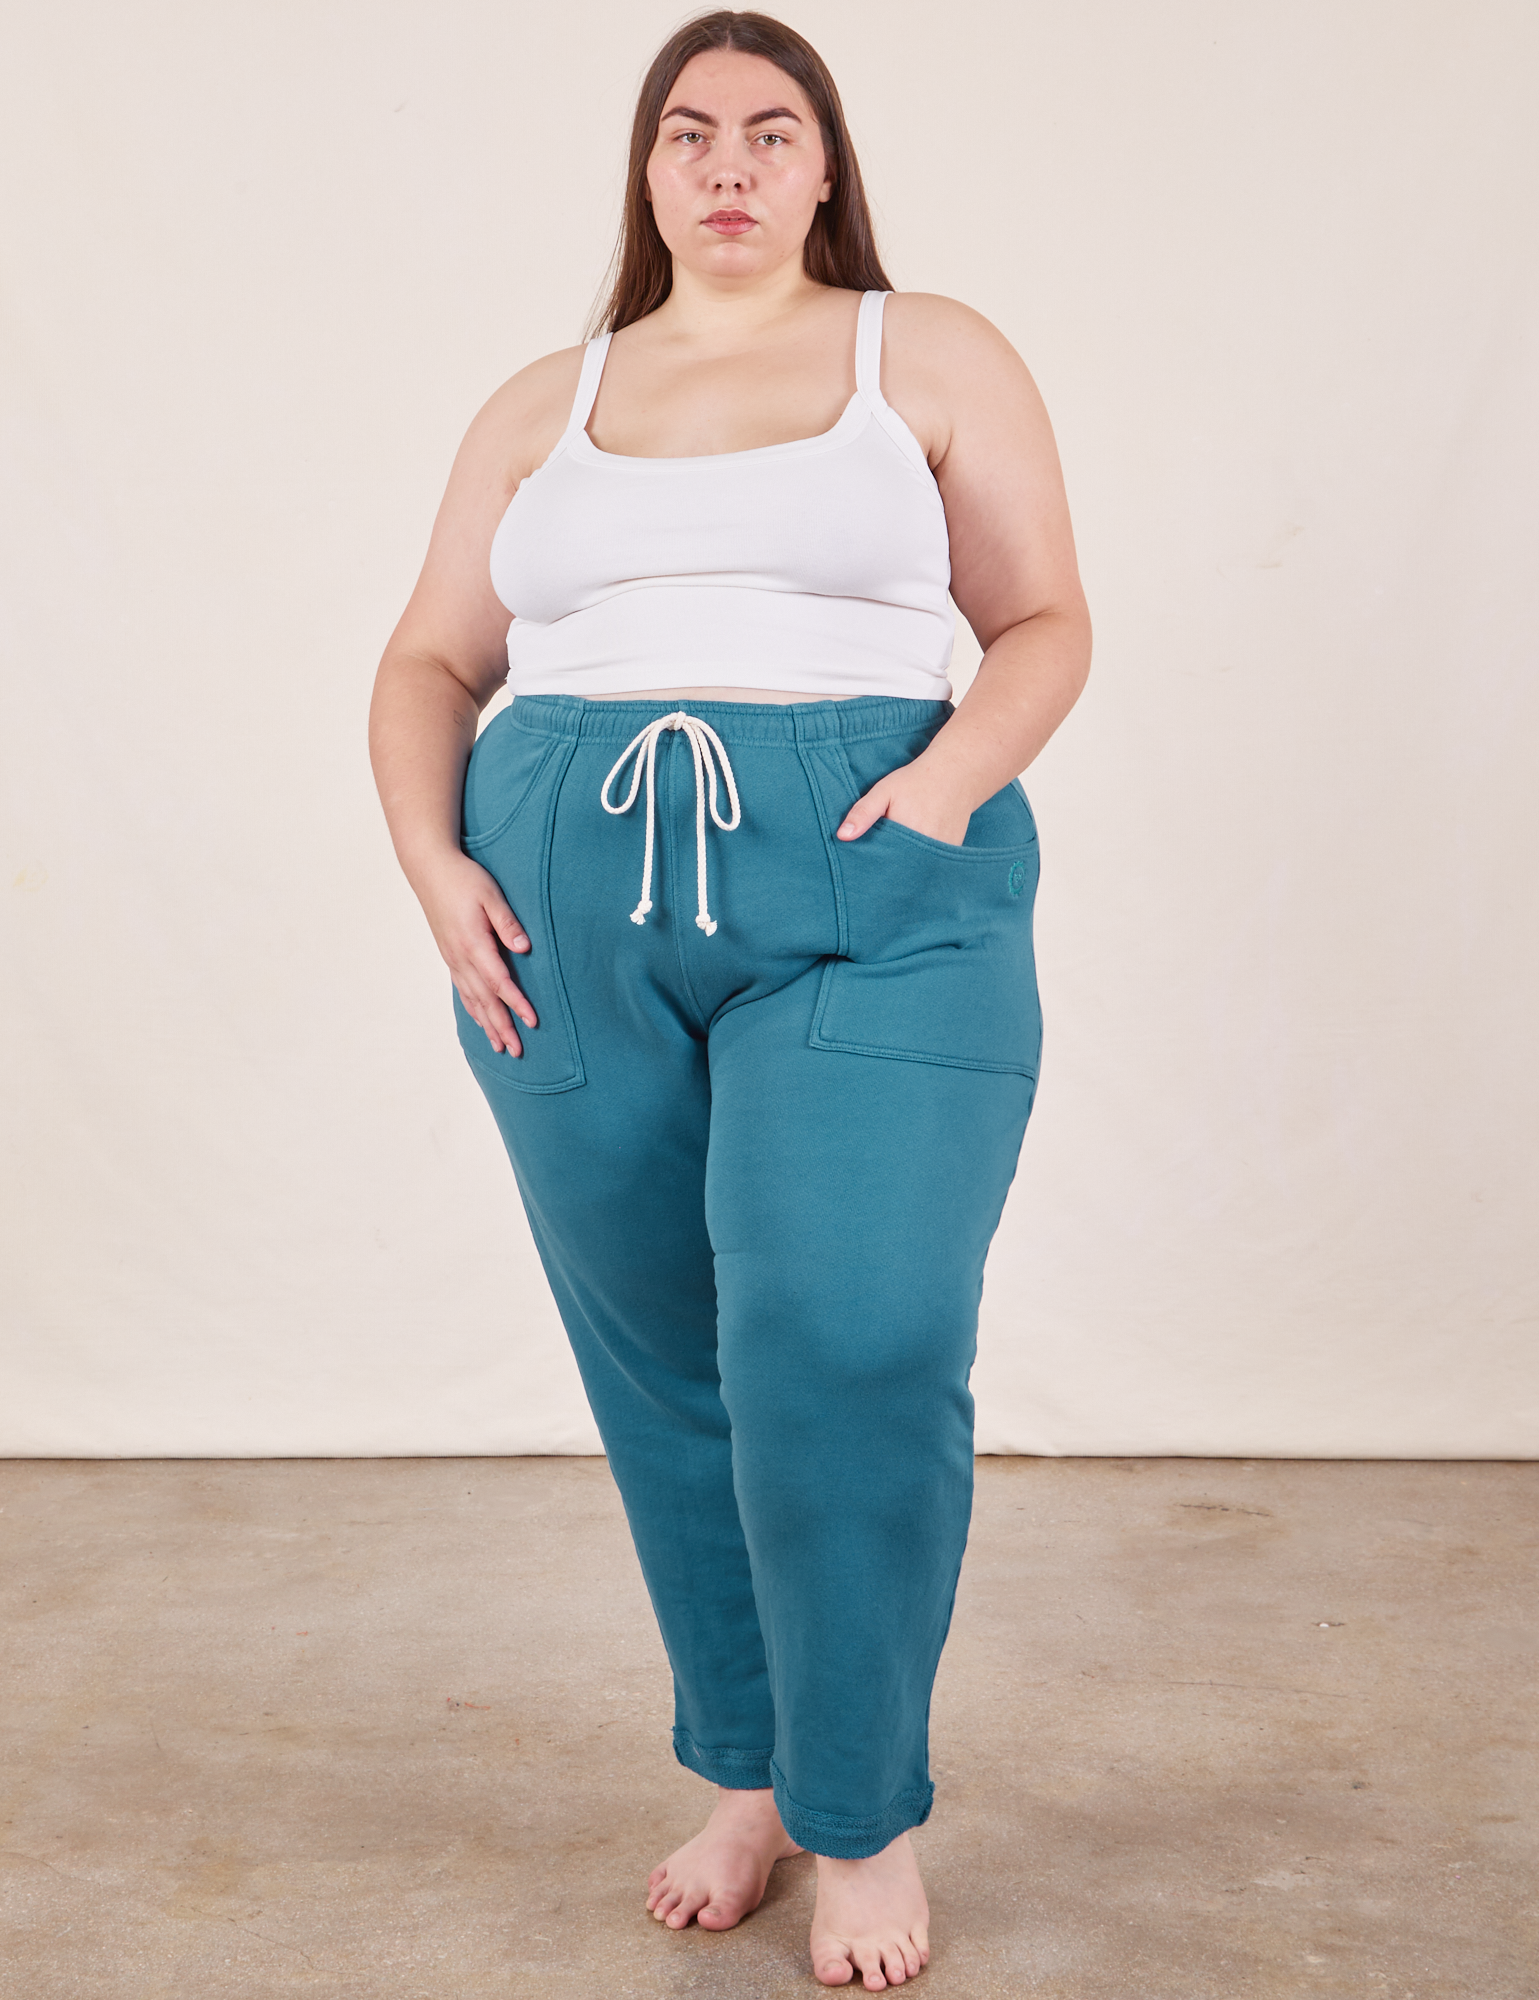 Marielena is 5&#39;8&quot; and wearing 2XL Cropped Rolled Cuff Sweatpants in Marine Blue paired with vintage off-white Cami